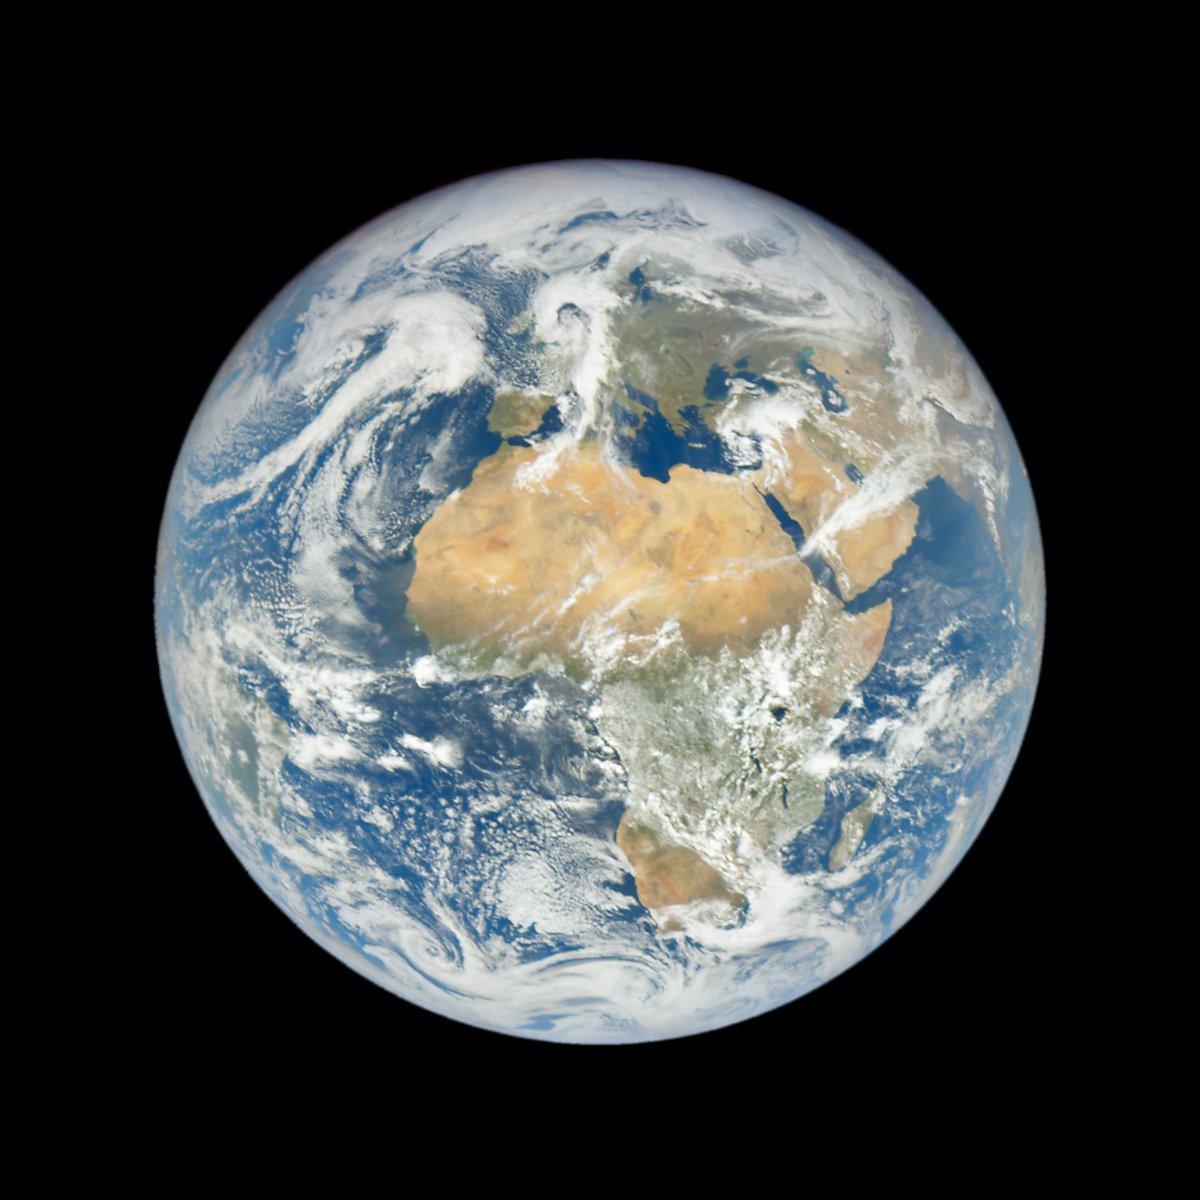 11:19 on Tuesday April 9th, over Africa